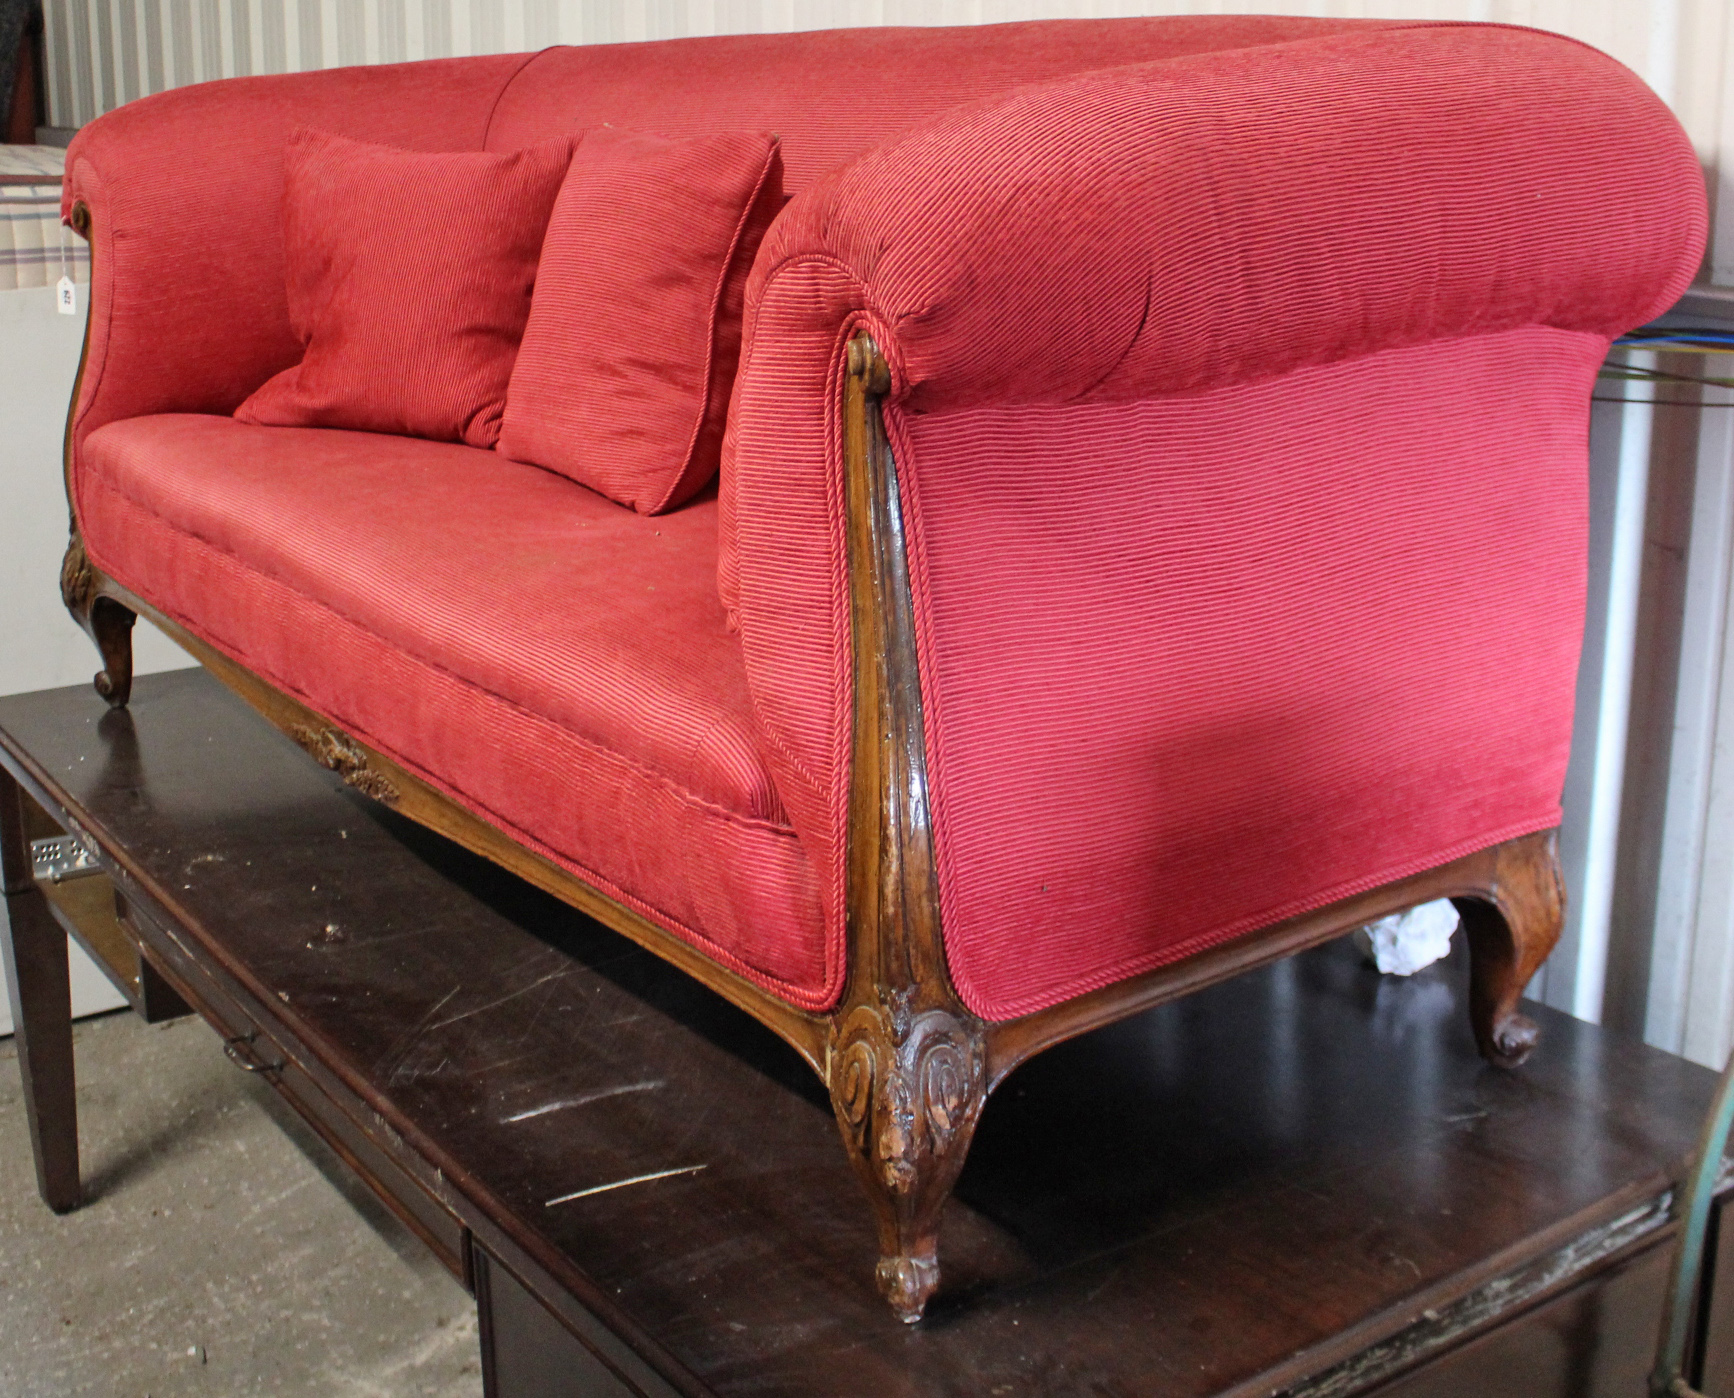 A 19th century carved walnut-frame Chesterfield type three-seater sofa, upholstered pink corduroy, - Image 2 of 2